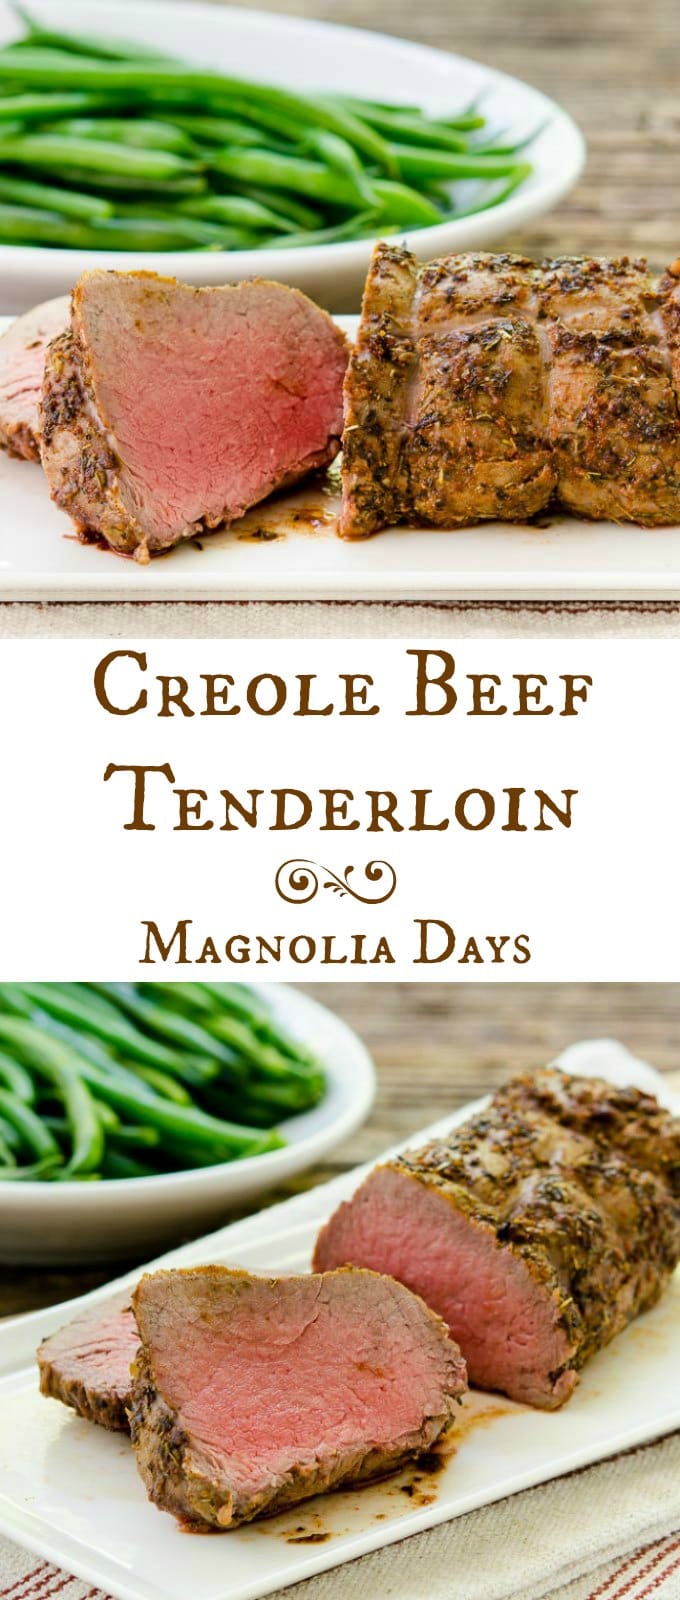 Creole Beef Tenderloin is tender, juicy, and has a kick of heat. It's an elegant beef roast recipe that's easy to make and great for two or three.